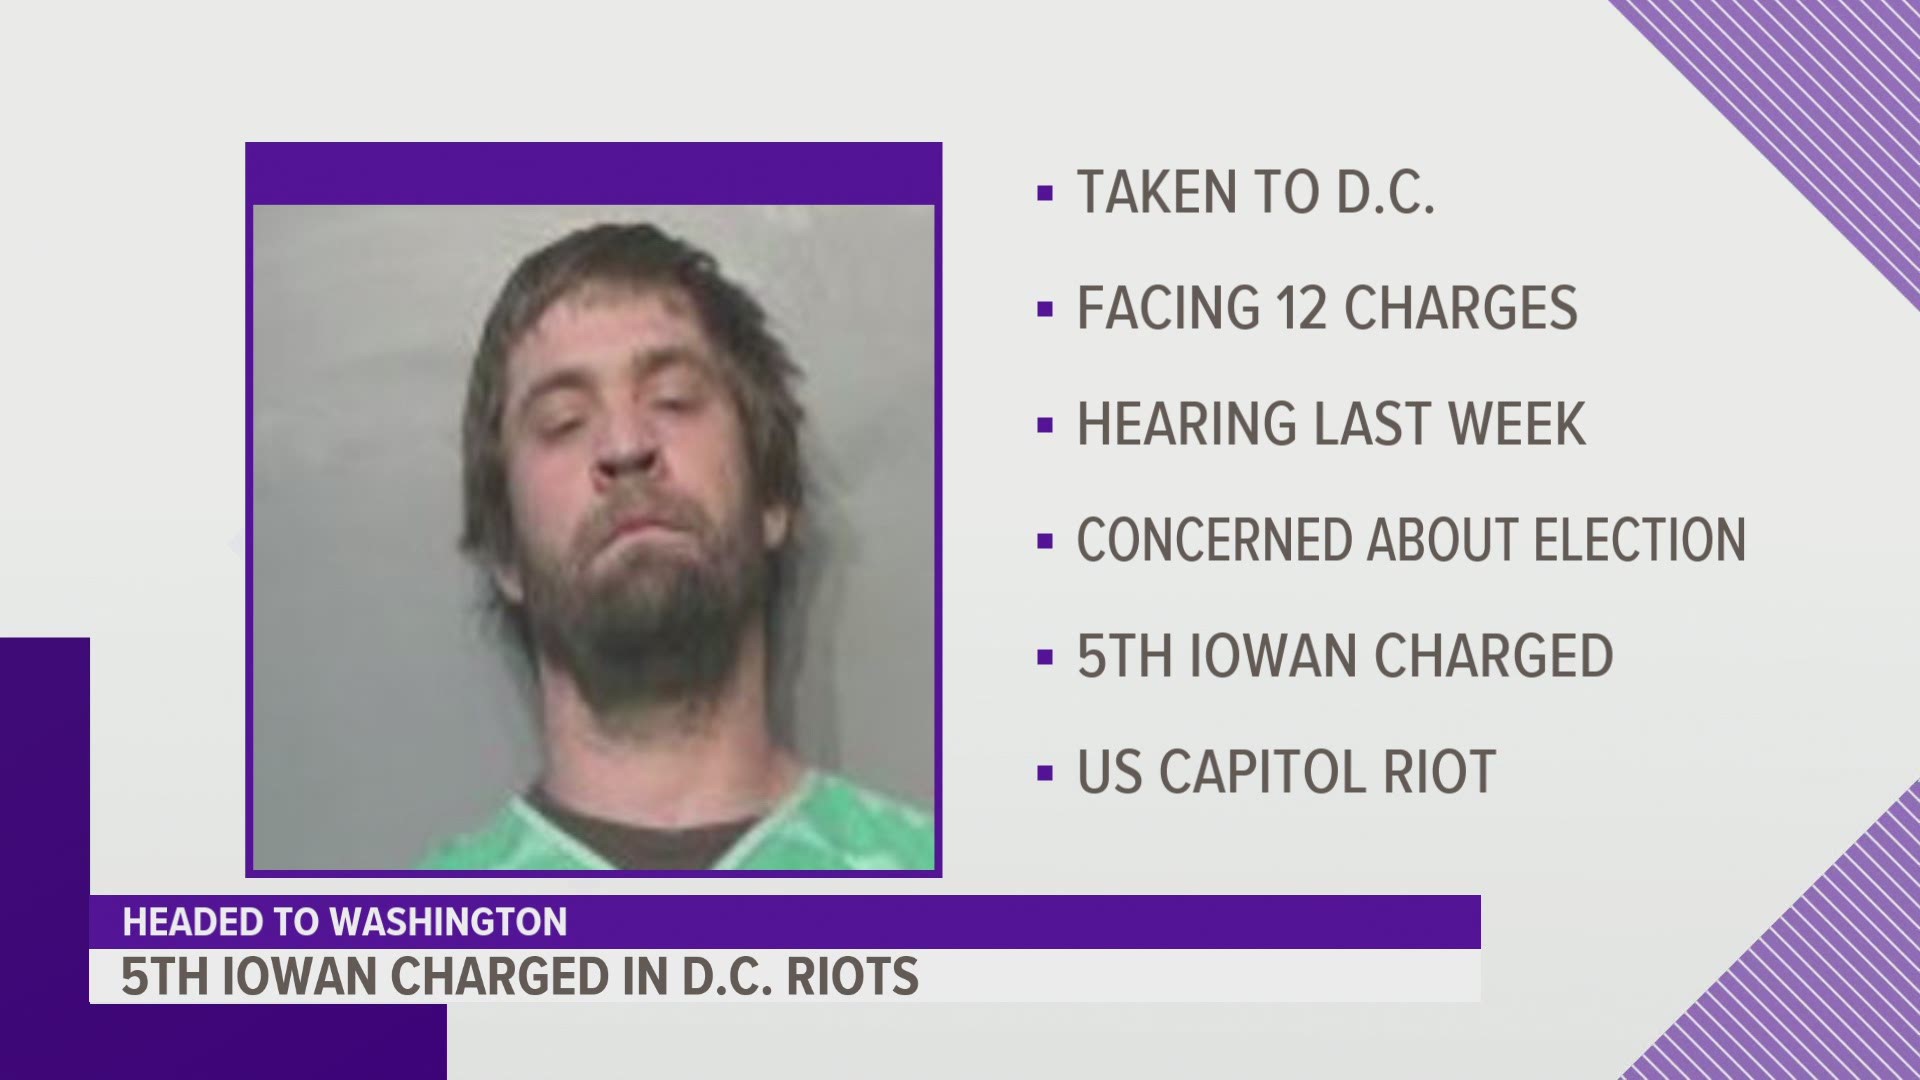 Kyle Young was being held in the Polk County Jail. The Redfield resident faces 12 charges for his alleged involvement in the U.S. Capitol riots on Jan. 6.